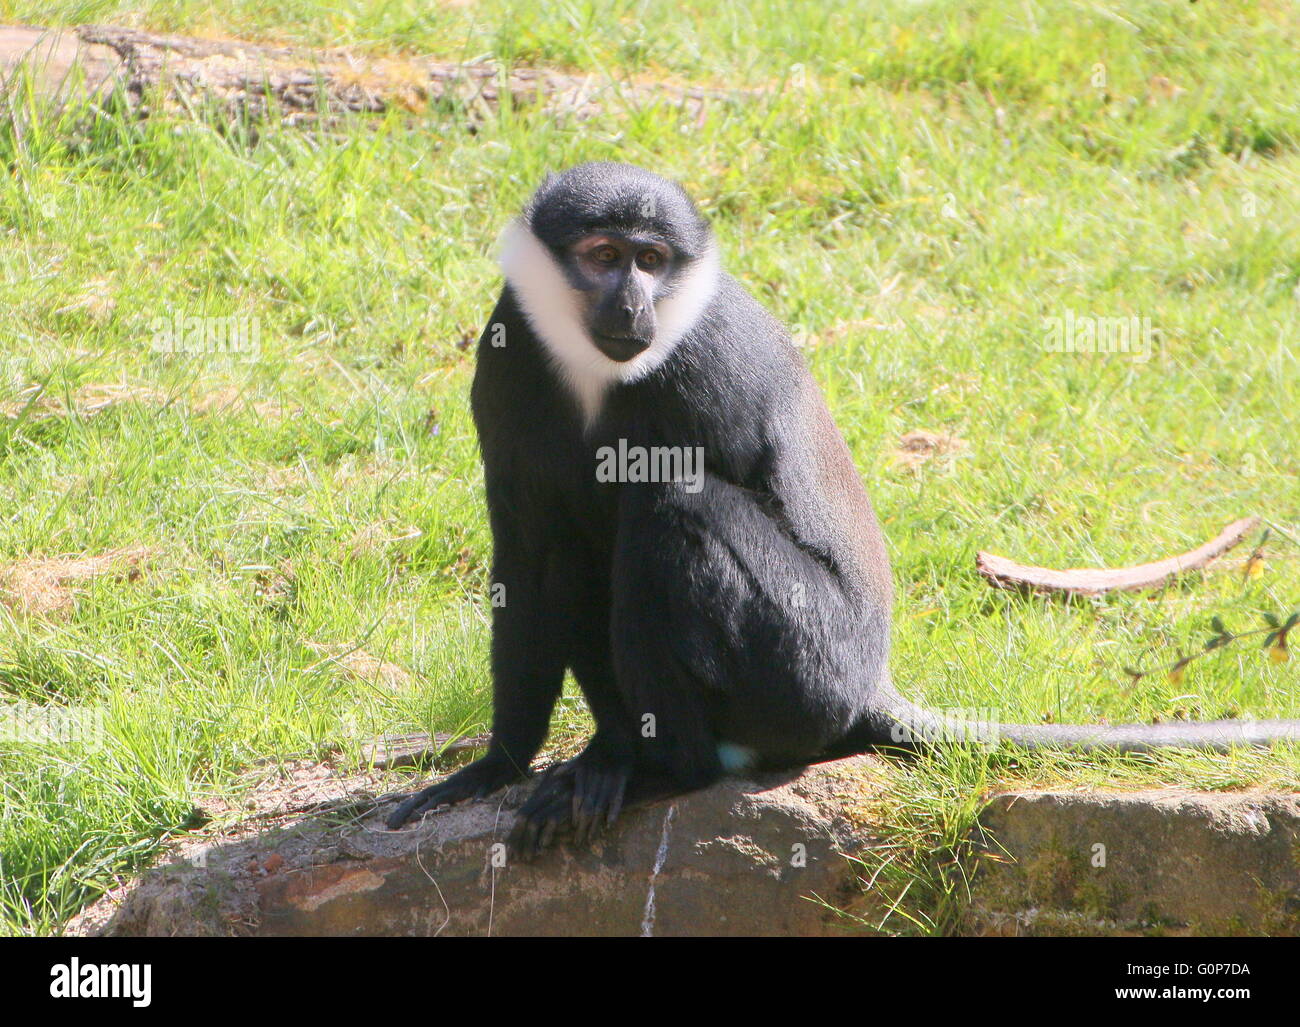 Central African L'Hoest's monkey (Cercopithecus lhoesti) sitting on a rock Stock Photo